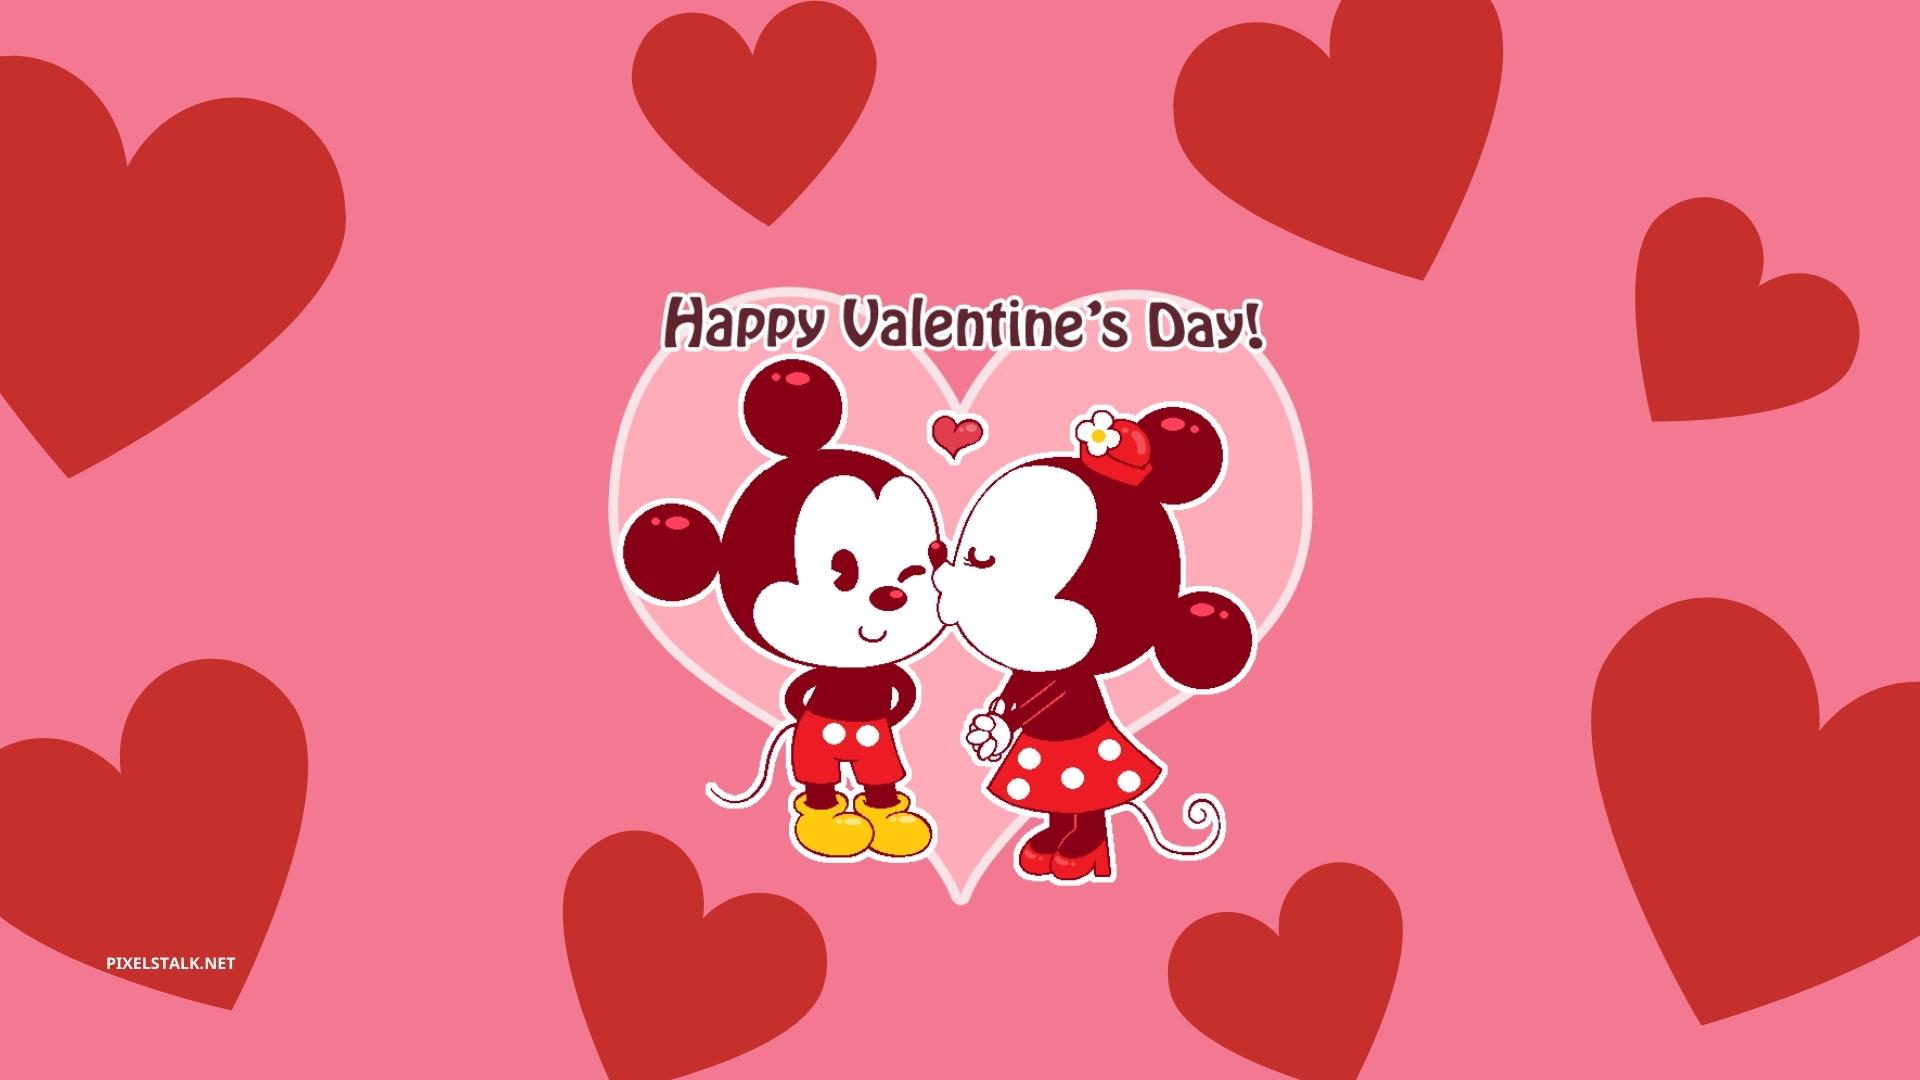 45 Virtual Valentines Day Zoom Backgrounds  Free Download  The Bash